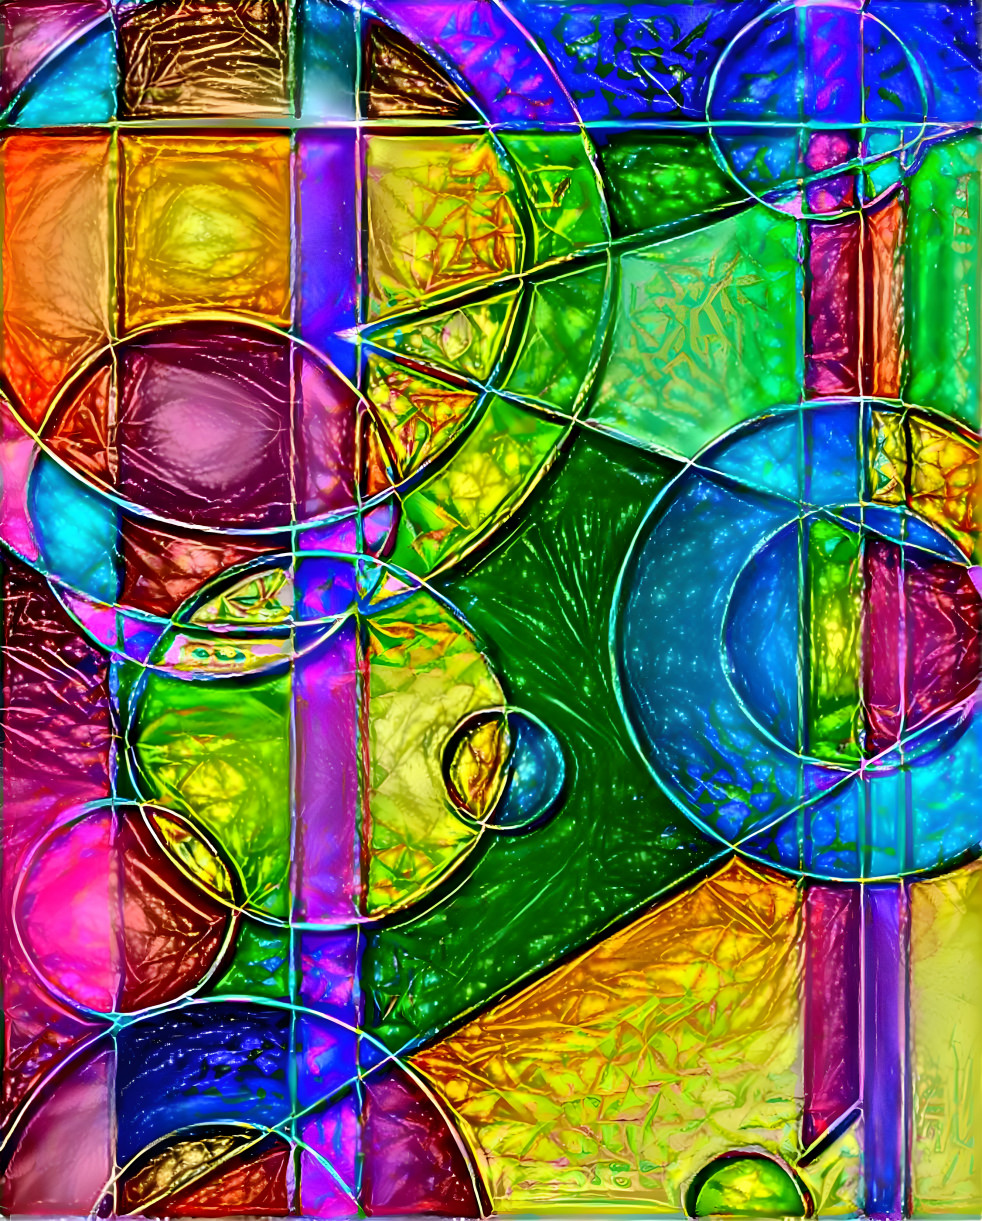 Texturized stained glass